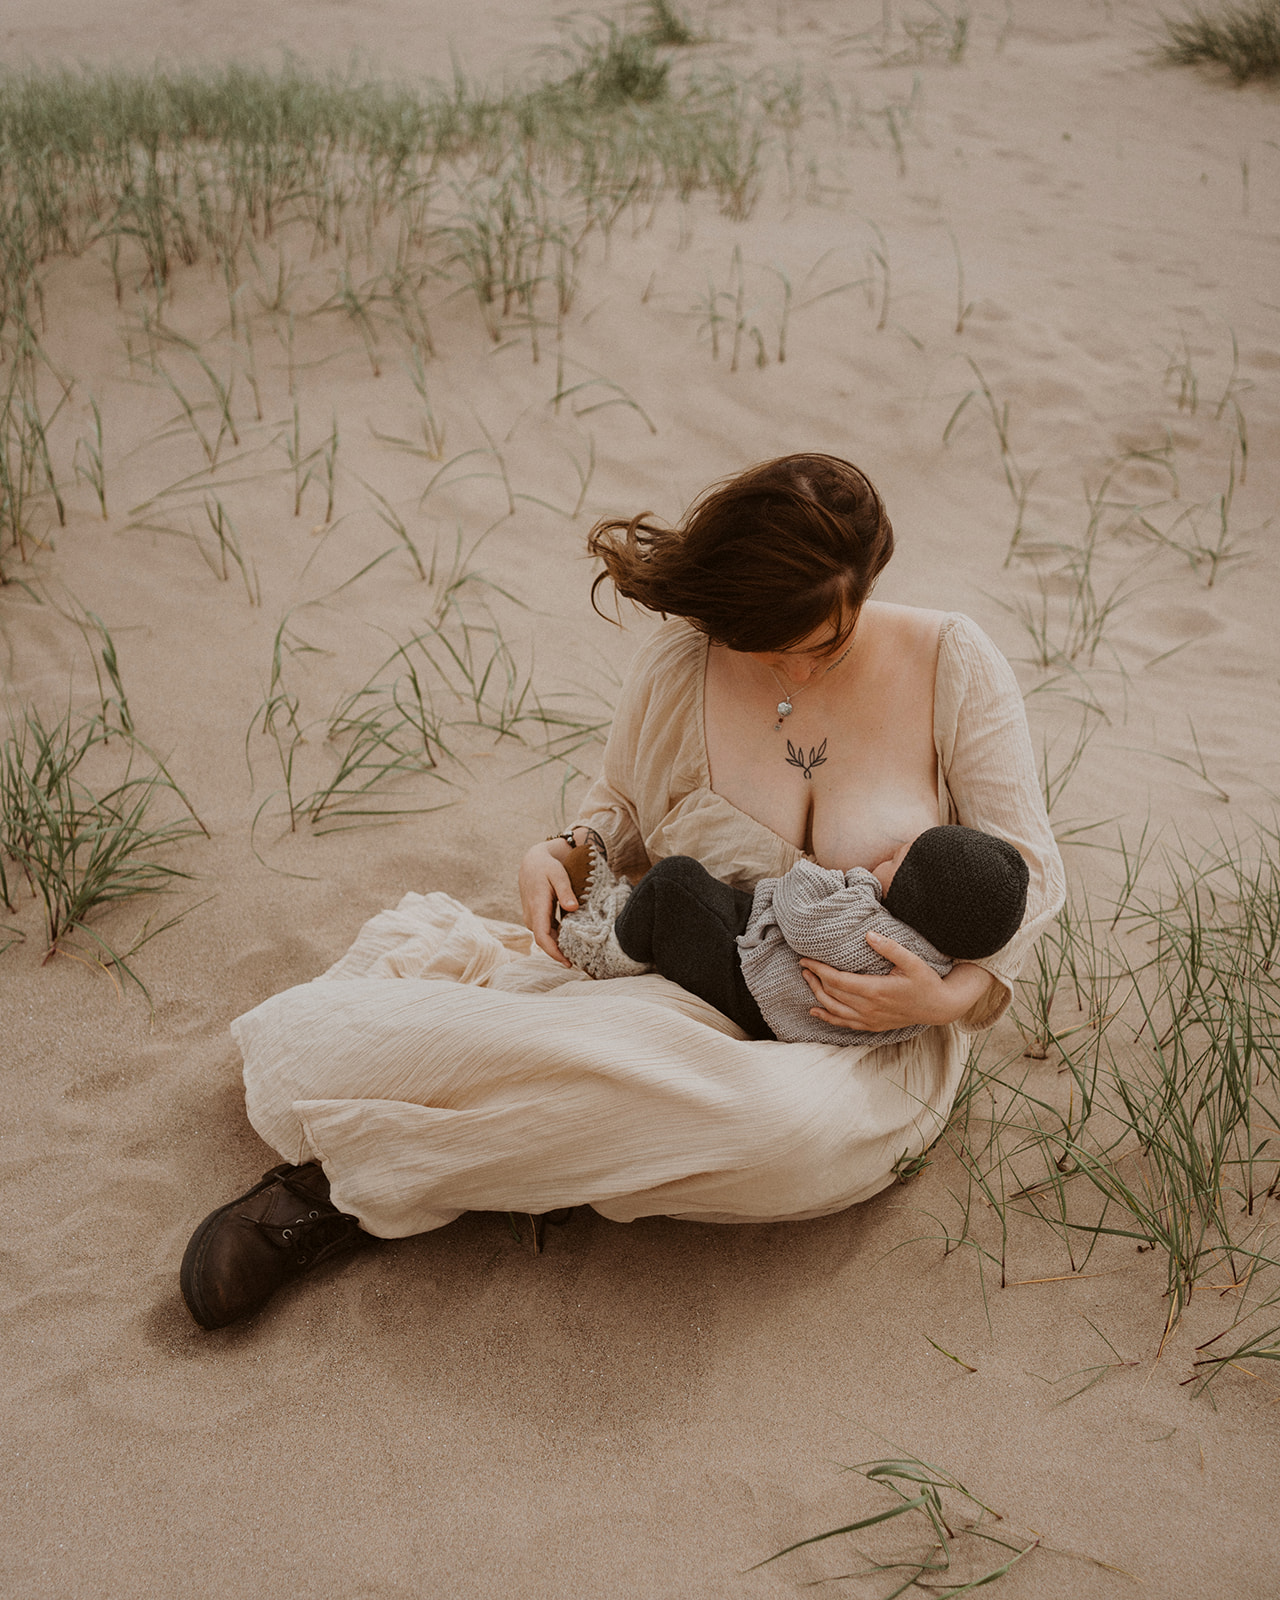 Mother breastfeeds newborn baby during family photoshoot on the beach at Tentsmuir, Scotland